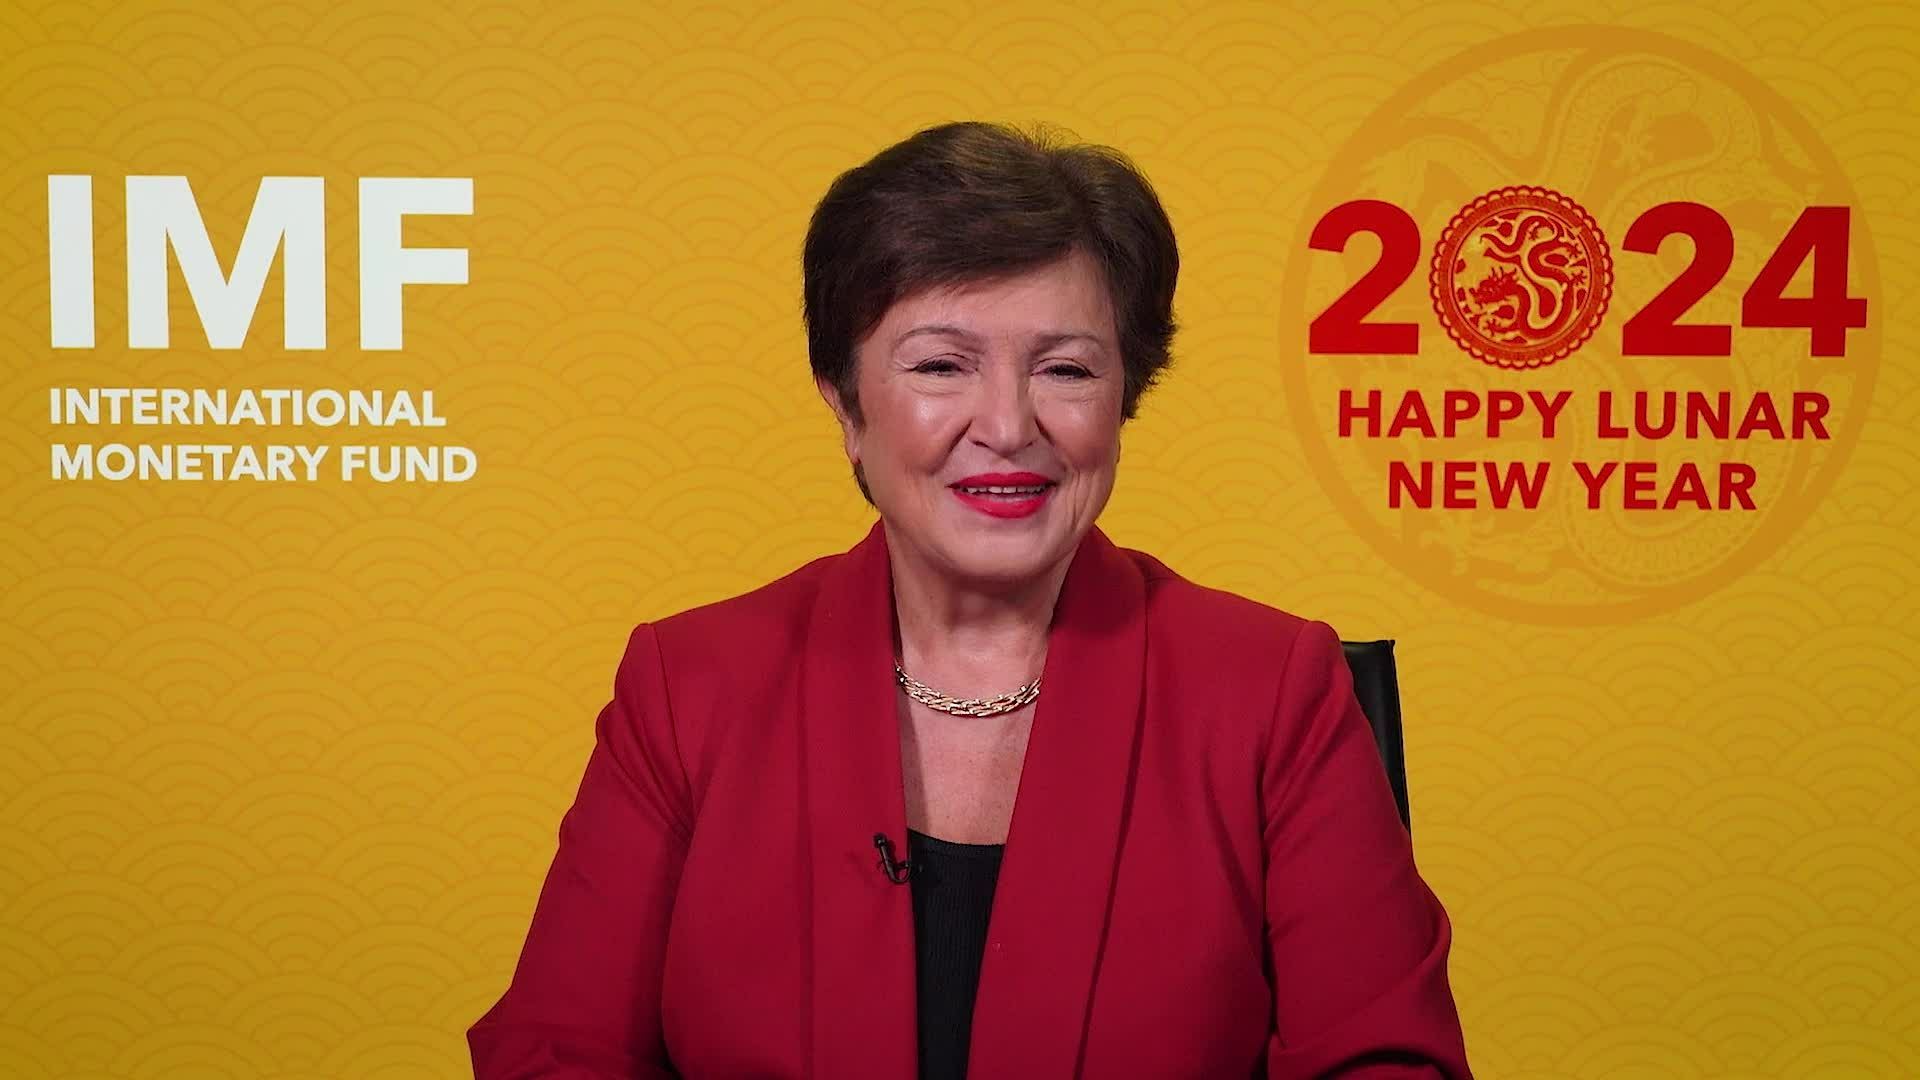 IMF Managing Director Kristalina Georgieva’s Video message on the occasion of the 2024 Lunar New Year - Clean